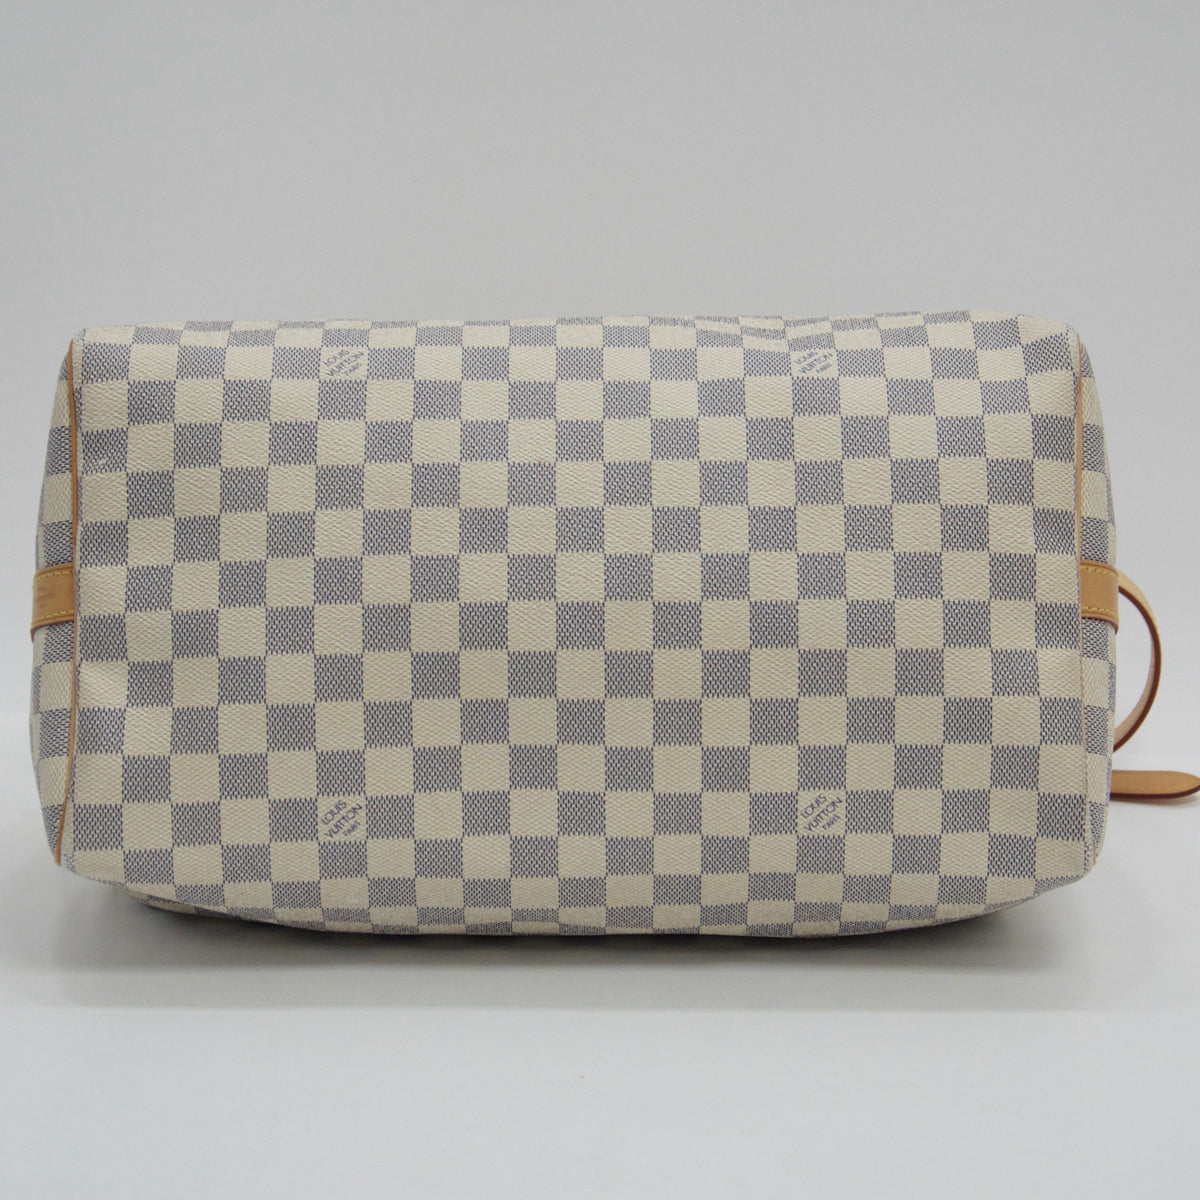 Louis Vuitton Damier Azur Speedy Bandouliere 35 Louis Vuitton Browse our  collection of products that will help you become the very best version of  yourself